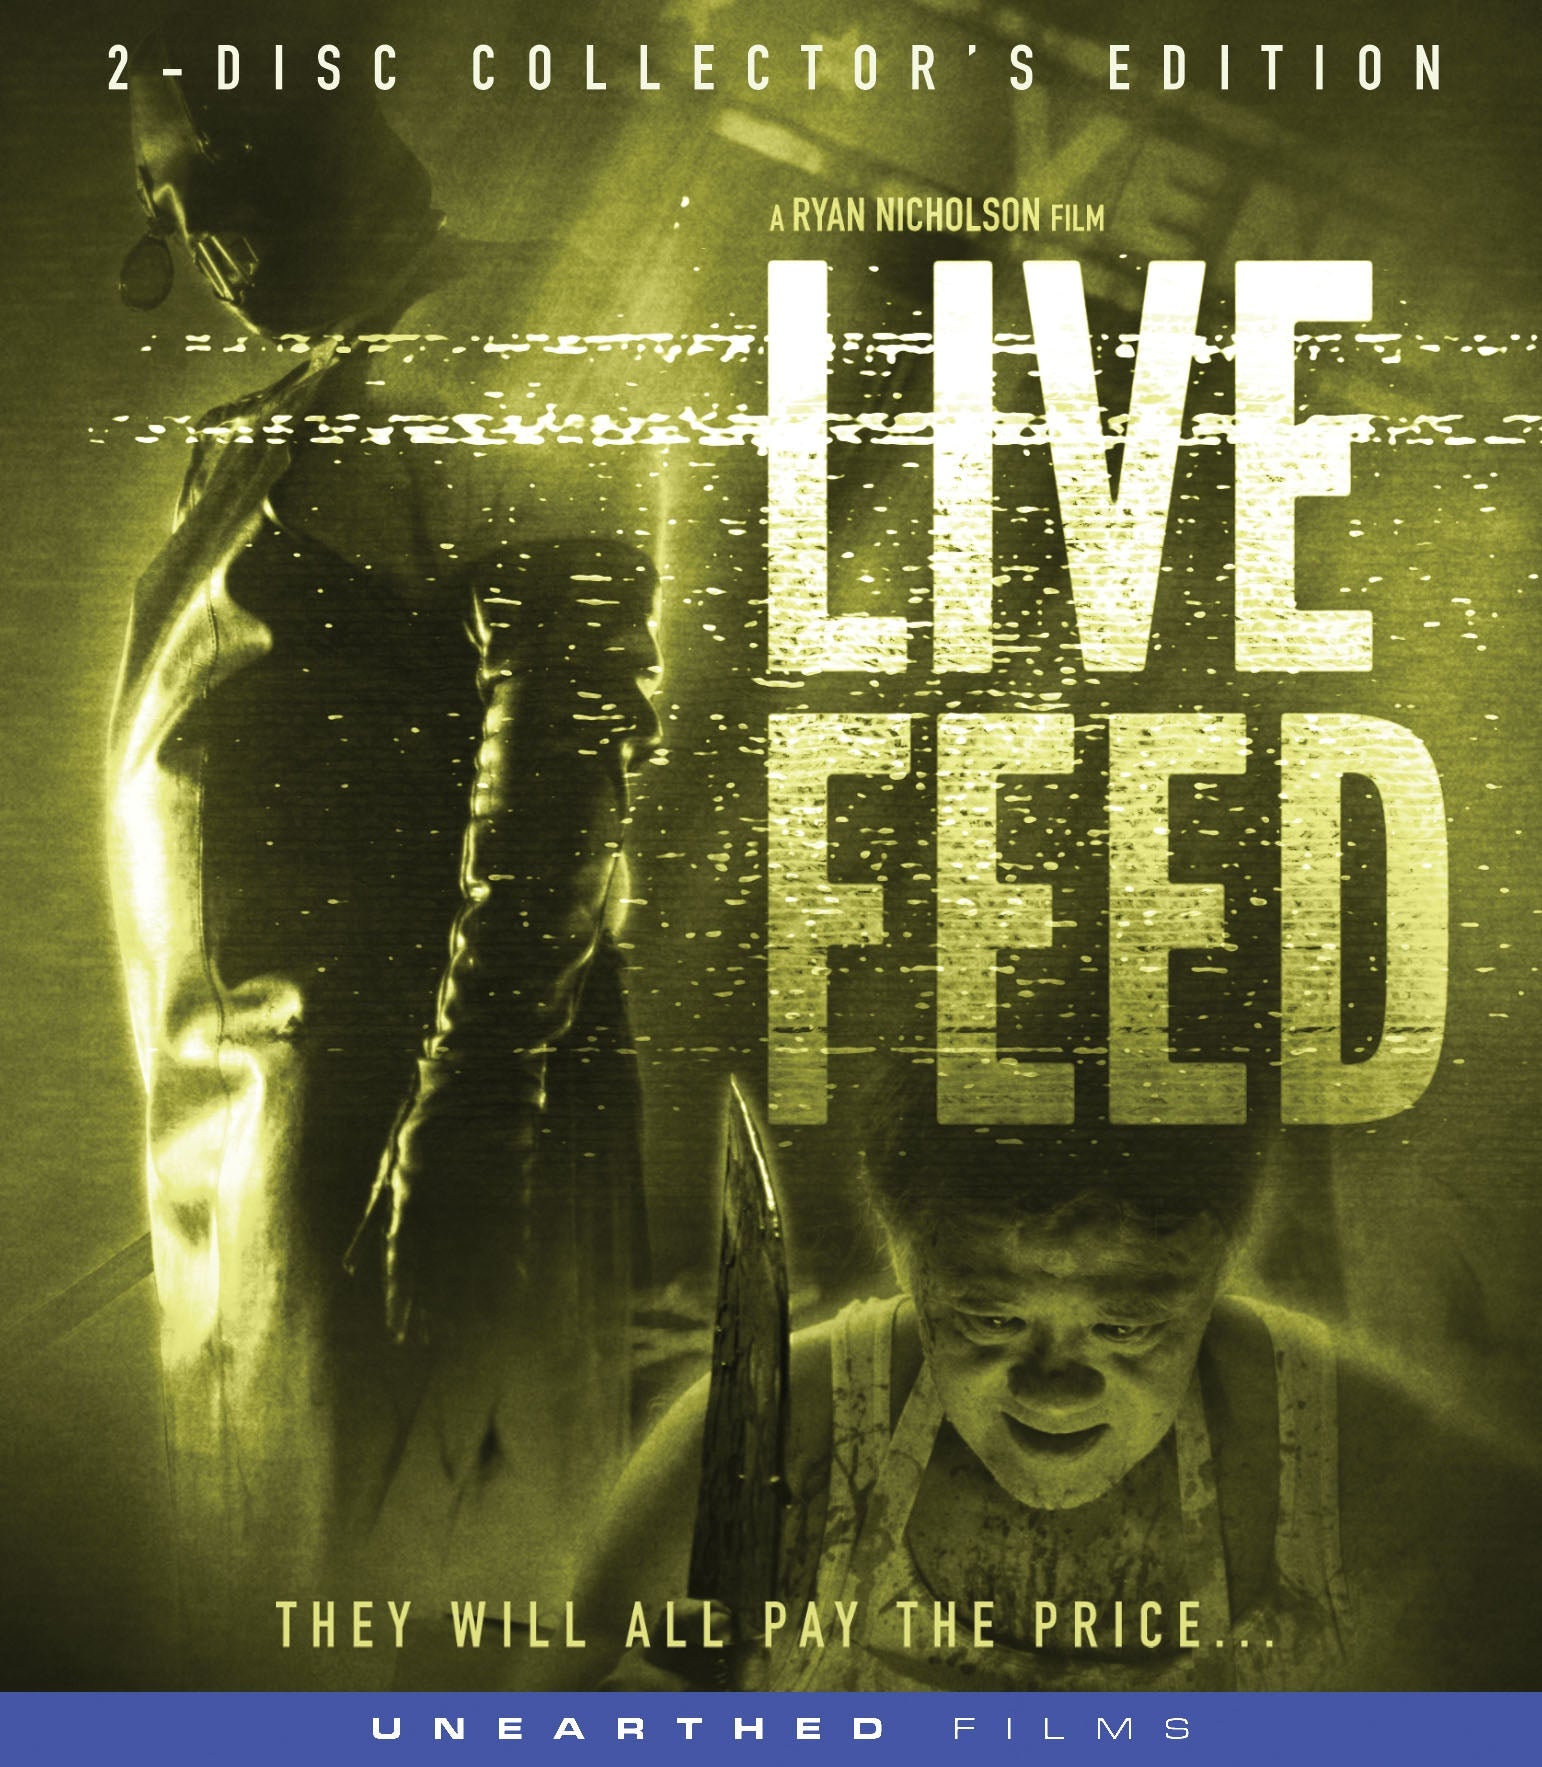 Live Feed (2-Disc Collectors Edition) Blu-Ray Blu-Ray